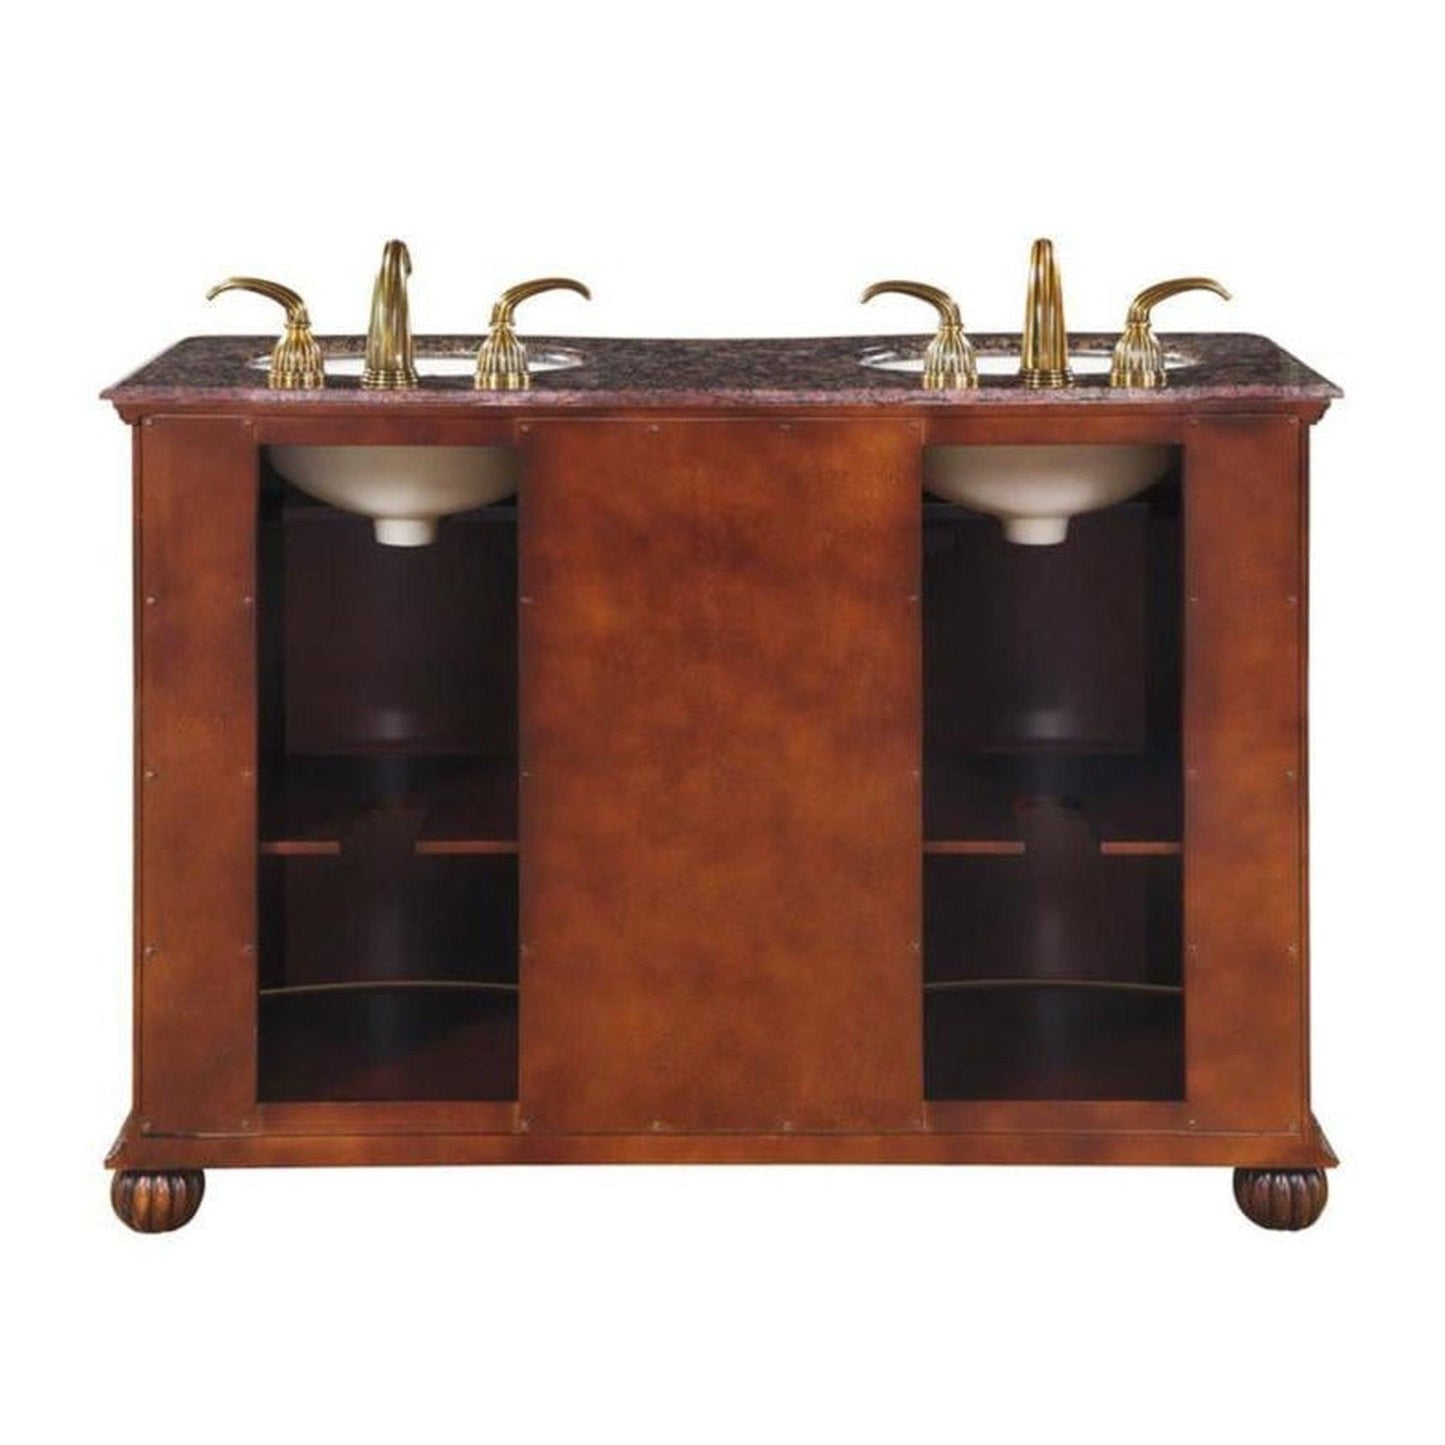 Silkroad Exclusive 52" Double Sink English Chestnut Bathroom Vanity With Baltic Brown Granite Countertop and Ivory Ceramic Undermount Sink